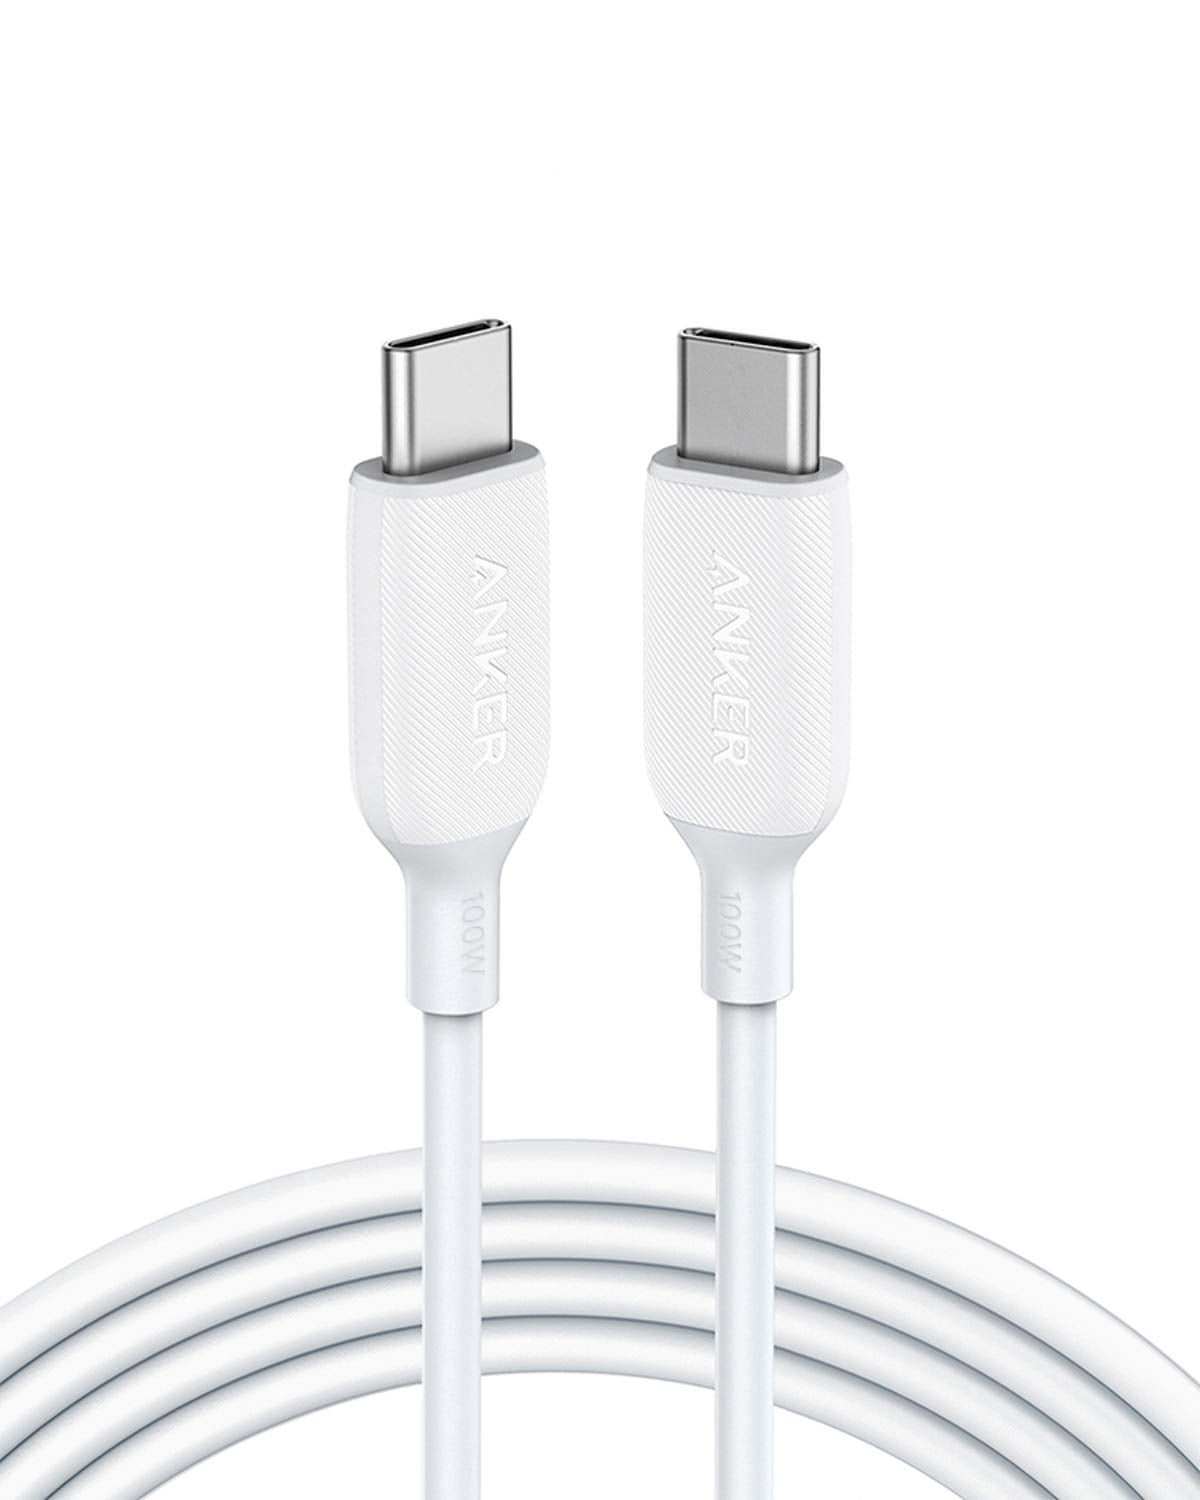 I nåde af Overflod rysten Anker Powerline III 100W USB C Charger Cable 6ft Type C Charging Data Sync  [White] - Walmart.com